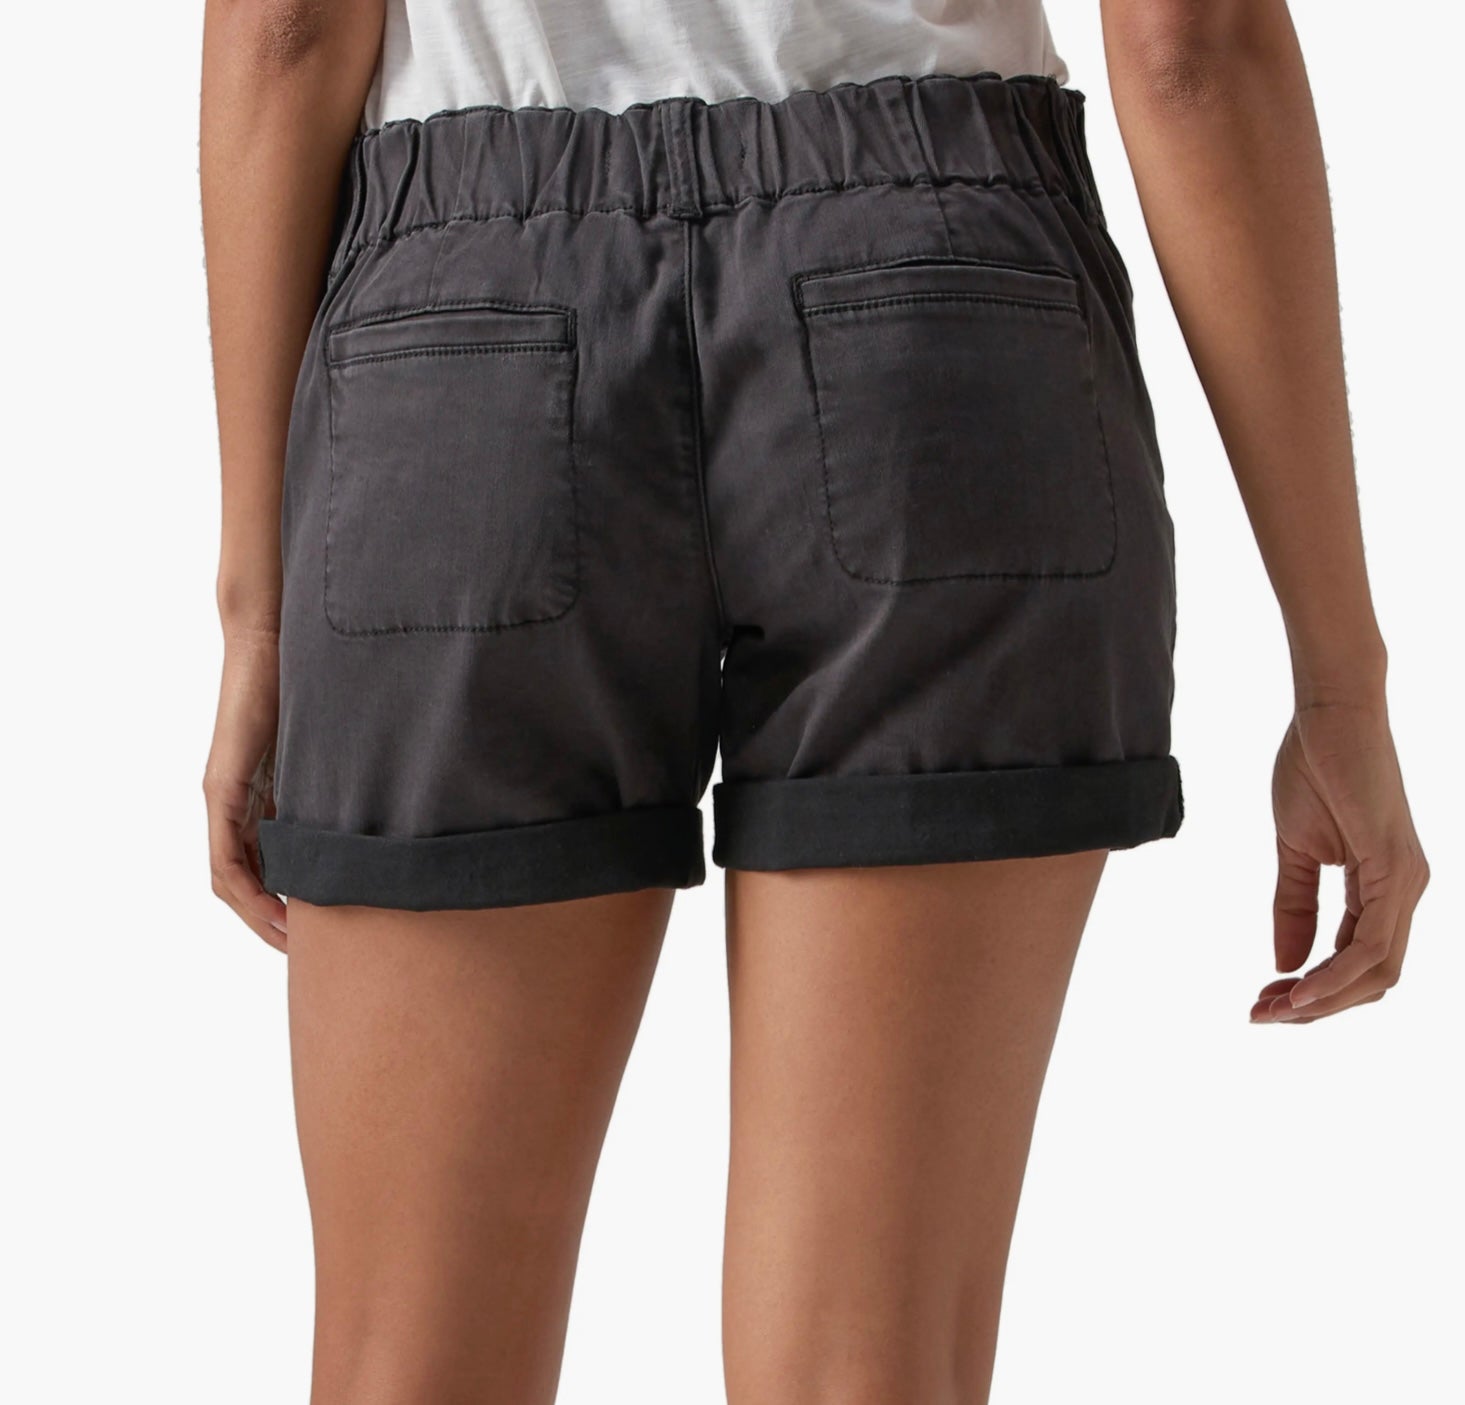 Renegade Rolled Cuff Shorts